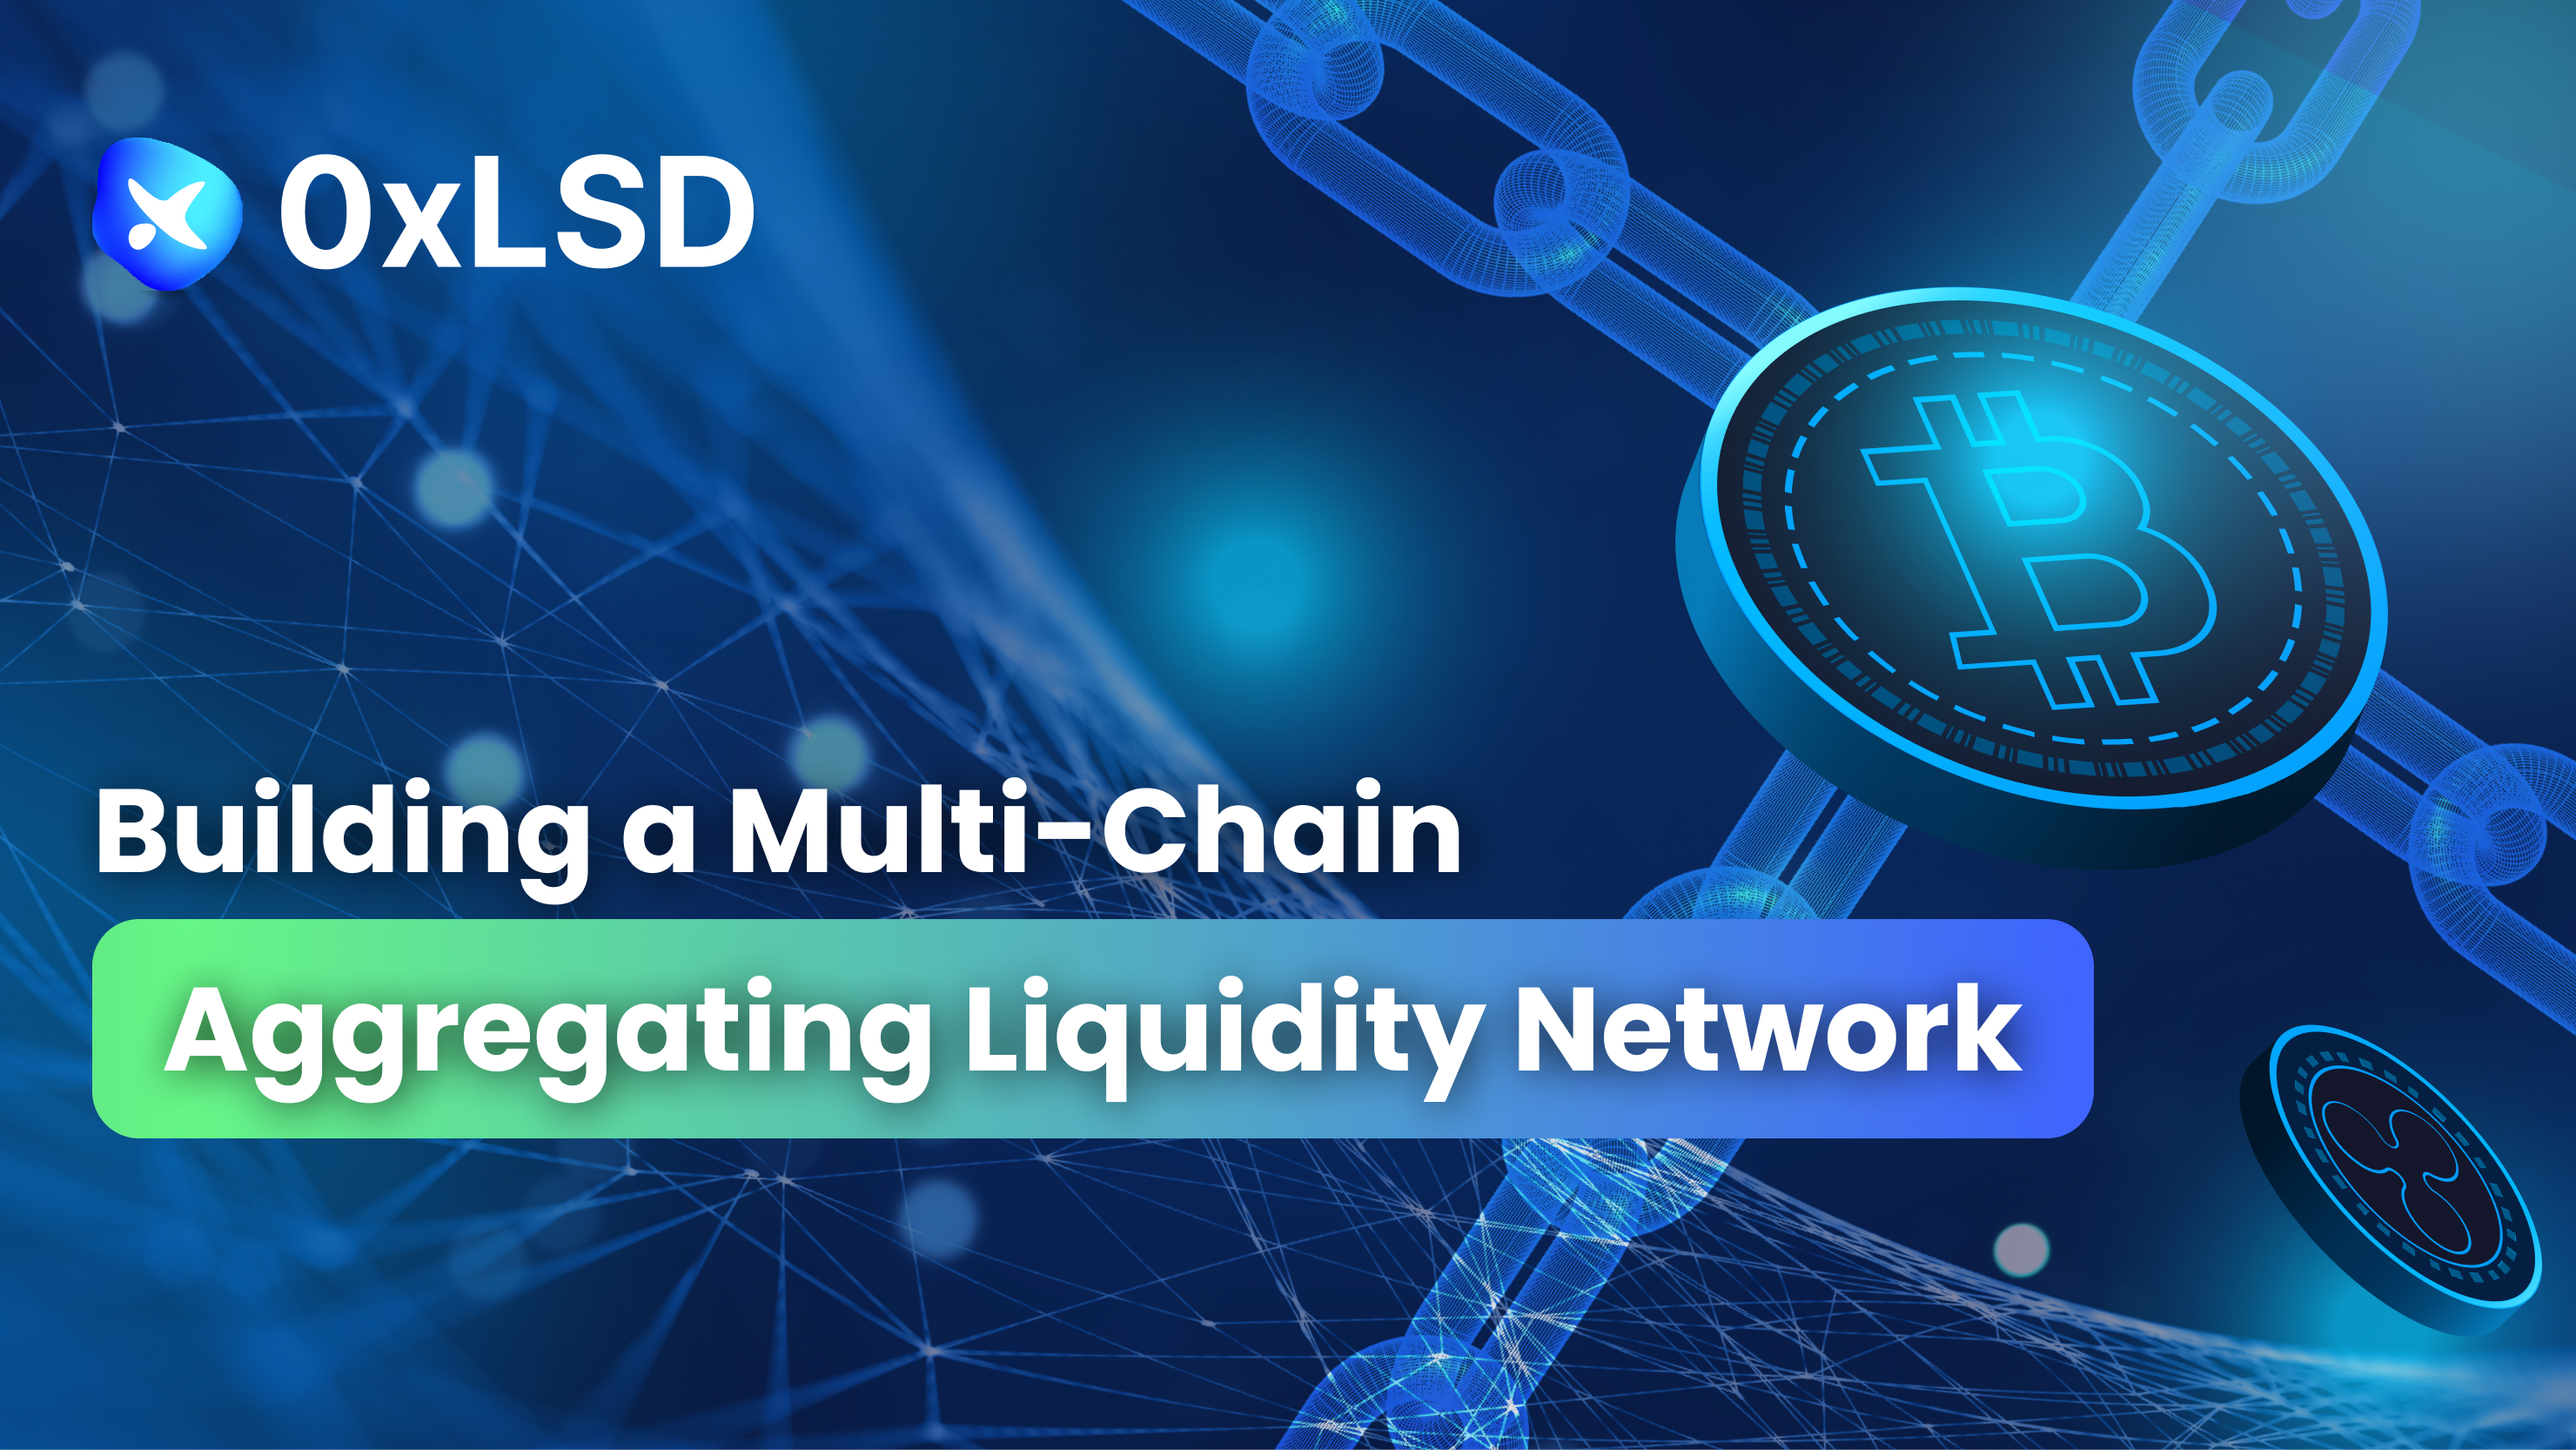 0xLSD: The Dark Horse of Liquidity Aggregation, How to Disrupt the Blockchain Financial Market    Blockchain technology,